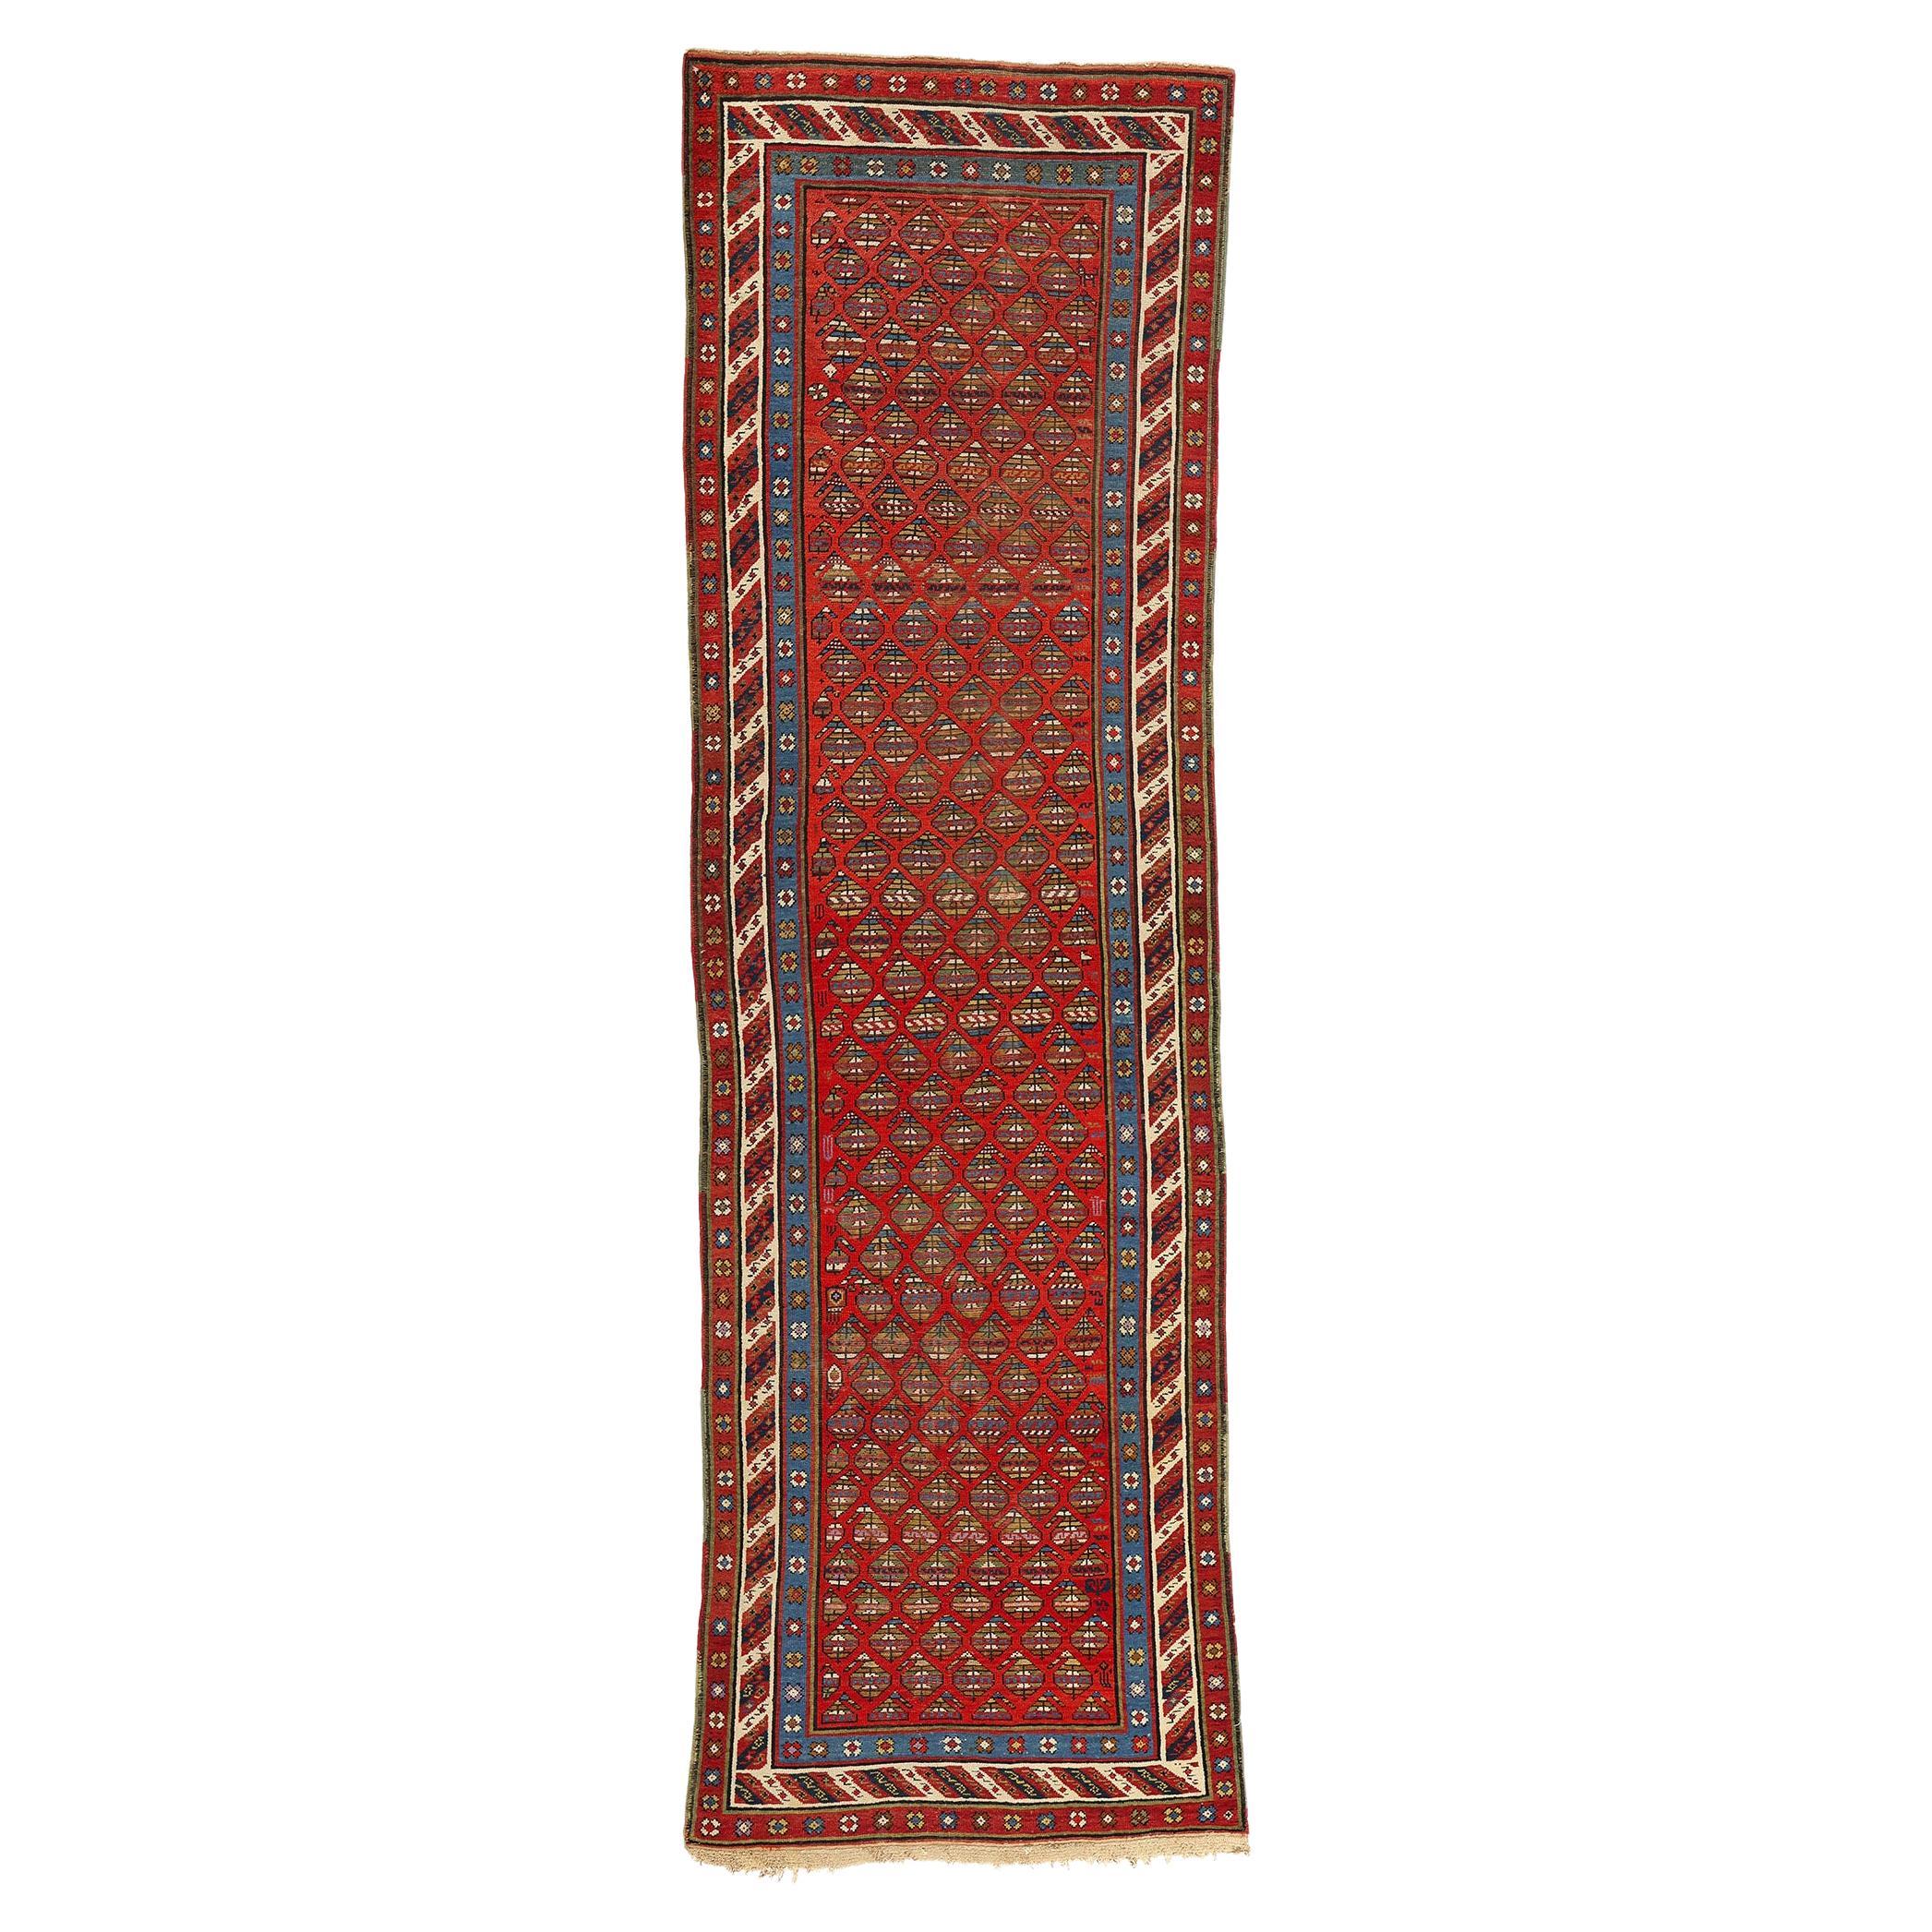 Antique Caucasian Shirvan Boteh Runner with Tribal Style, Hallway Runner